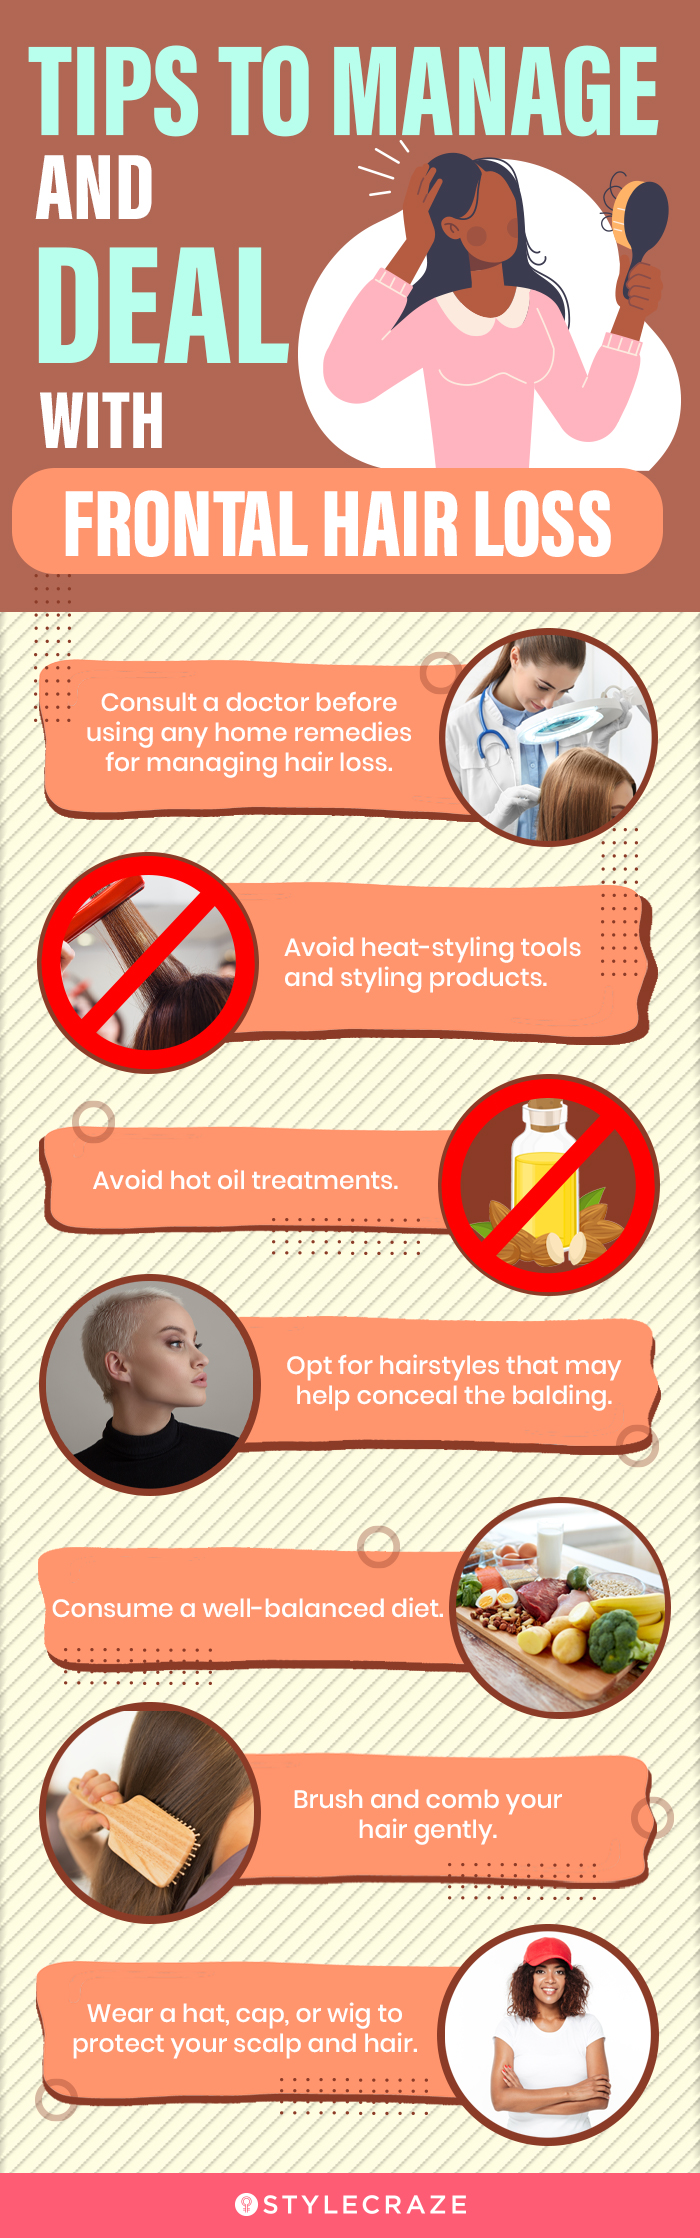 tips to manage and deal with frontal hair loss (infographic)